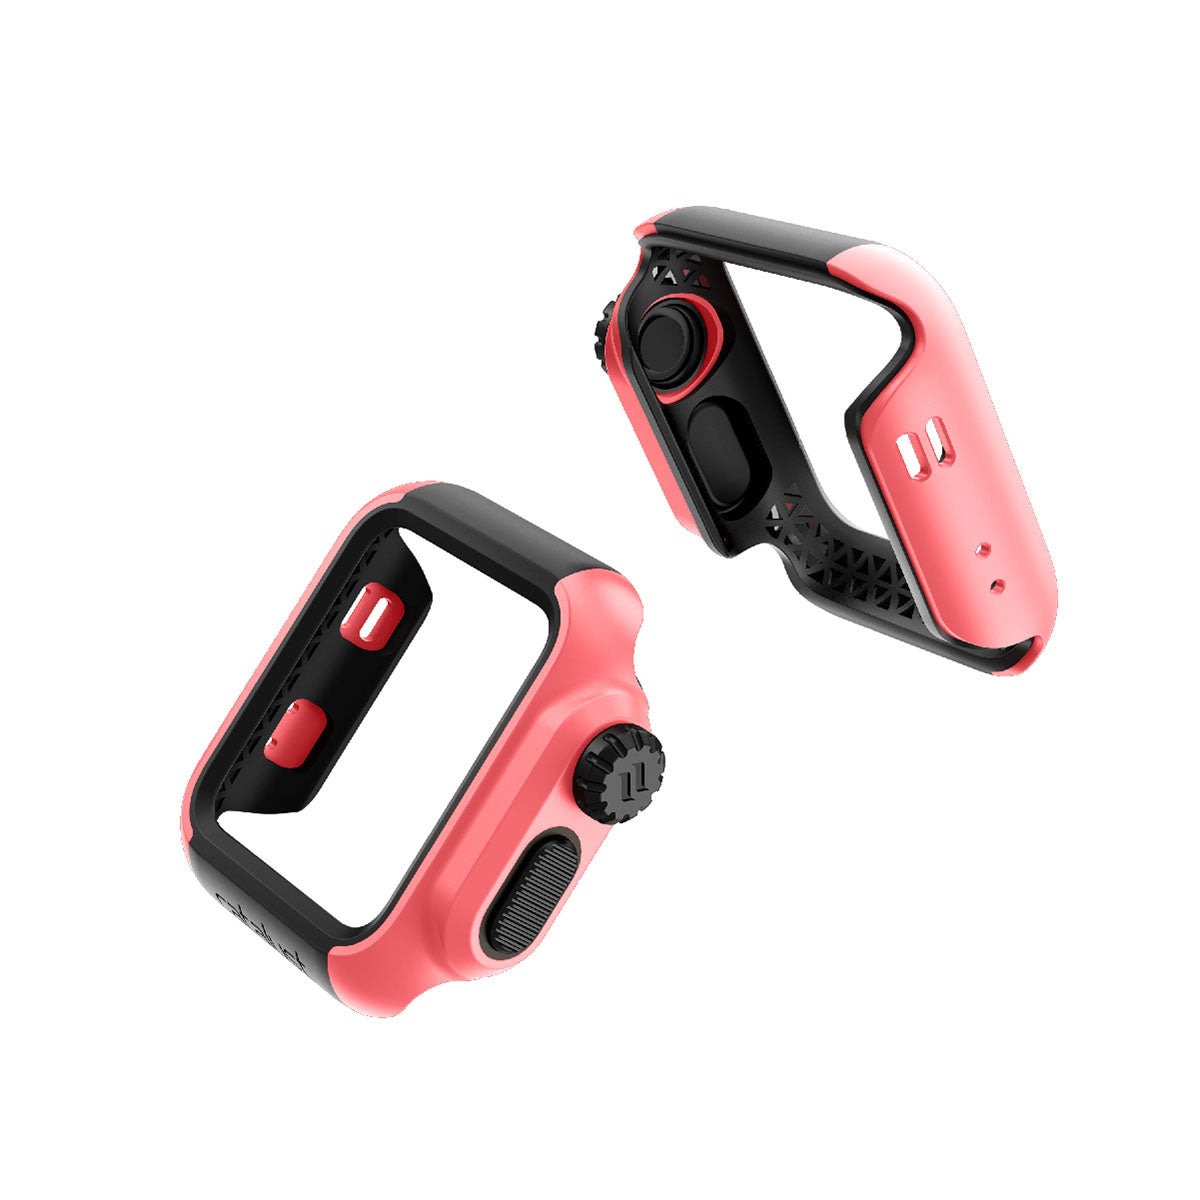 catalyst apple watch series 3 2 38mm impact protection case views of all the sides of the impact protection case coral